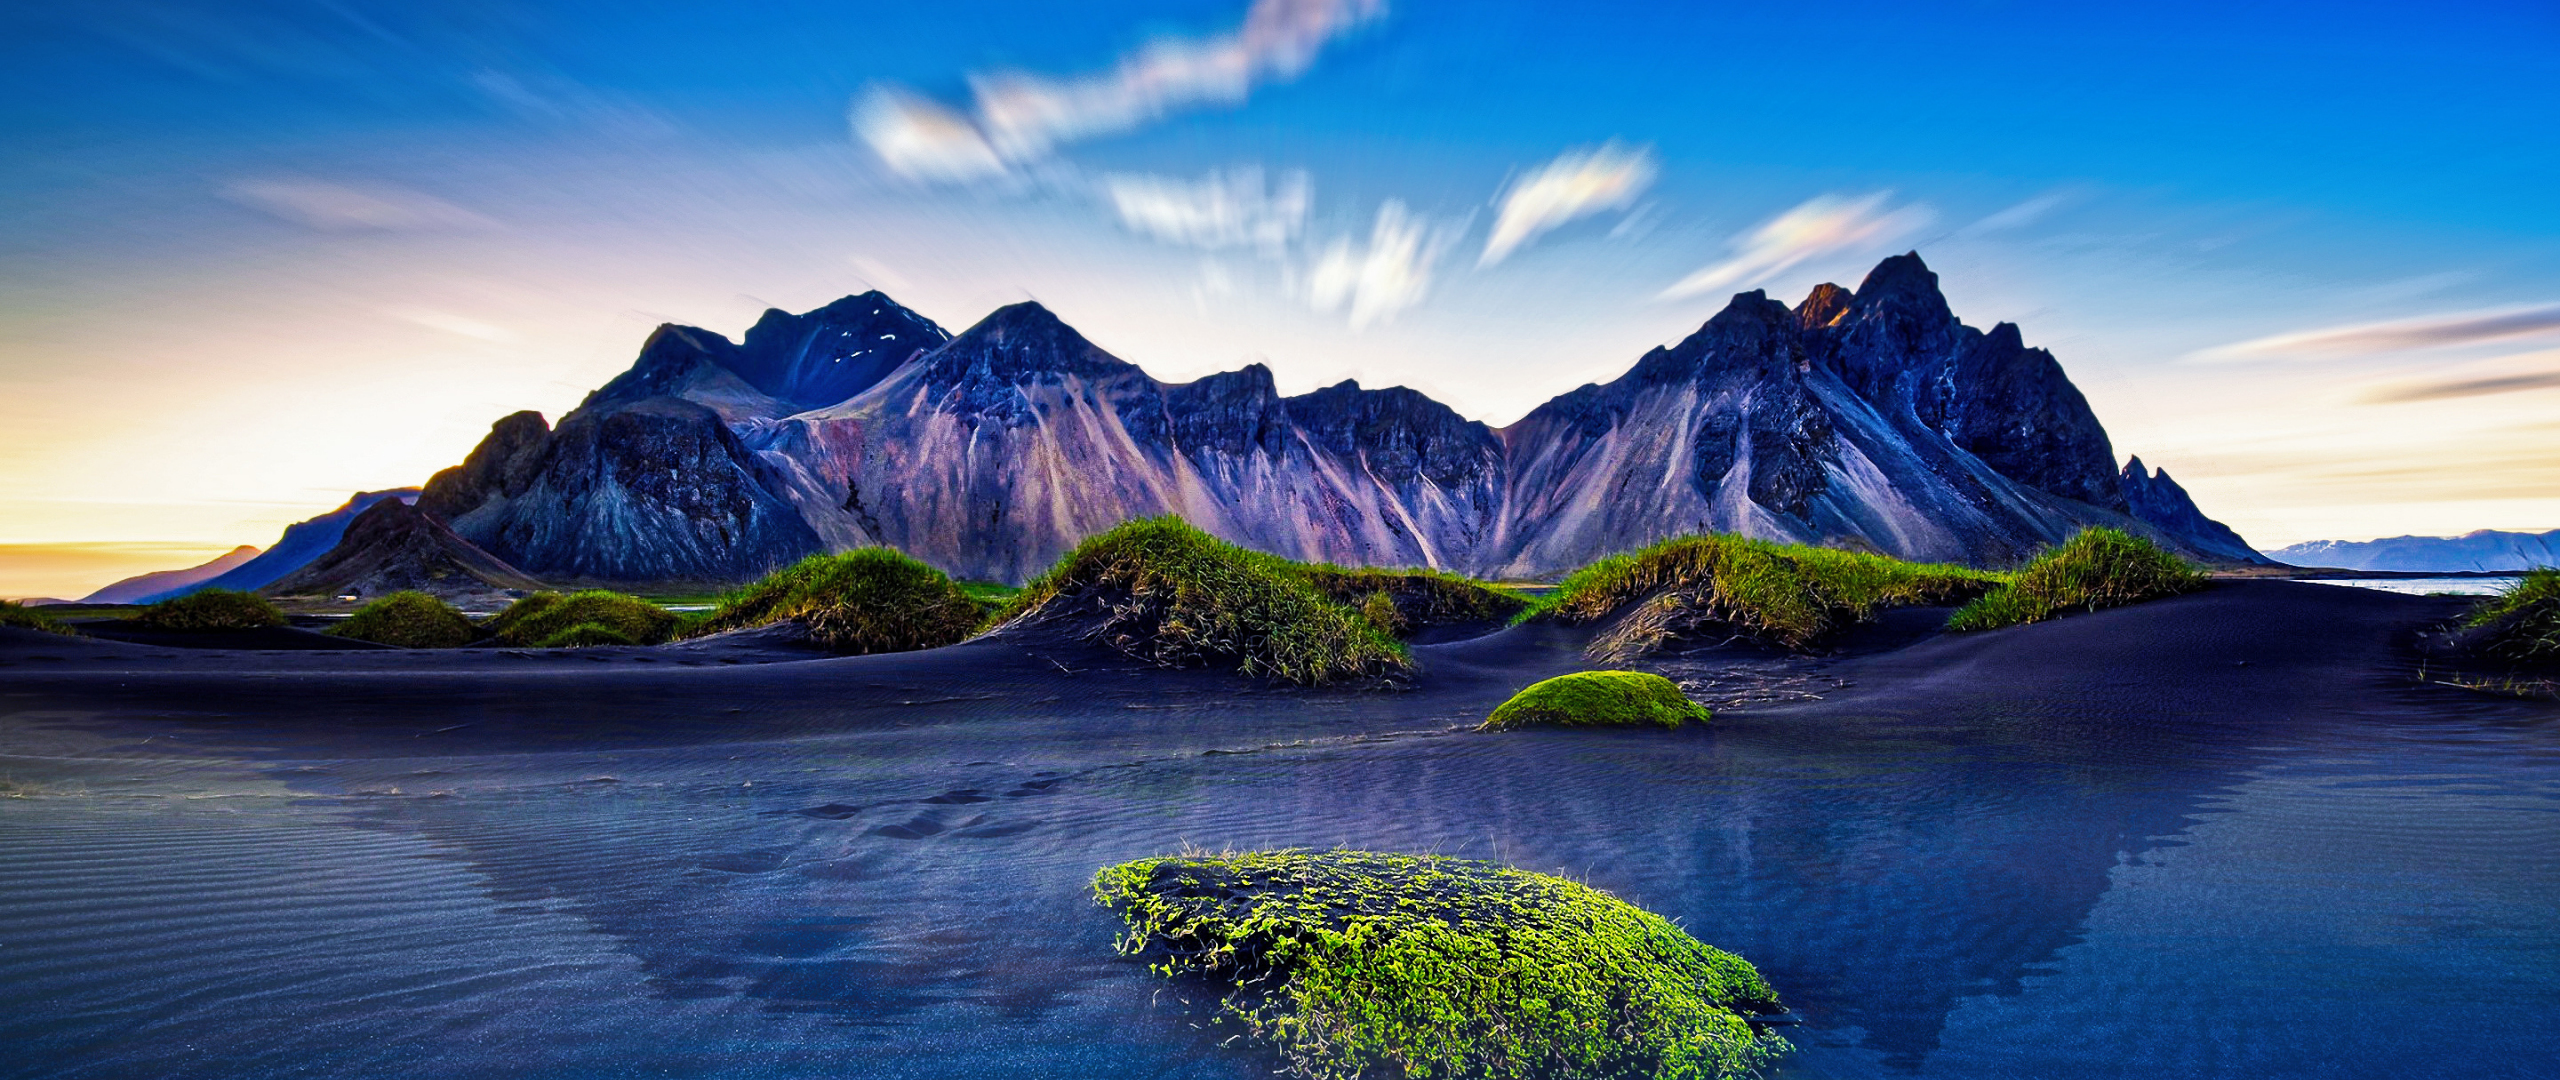 Download wallpaper 2560x1080 mountains, iceland, reflections, nature, dual  wide 2560x1080 hd background, 10620